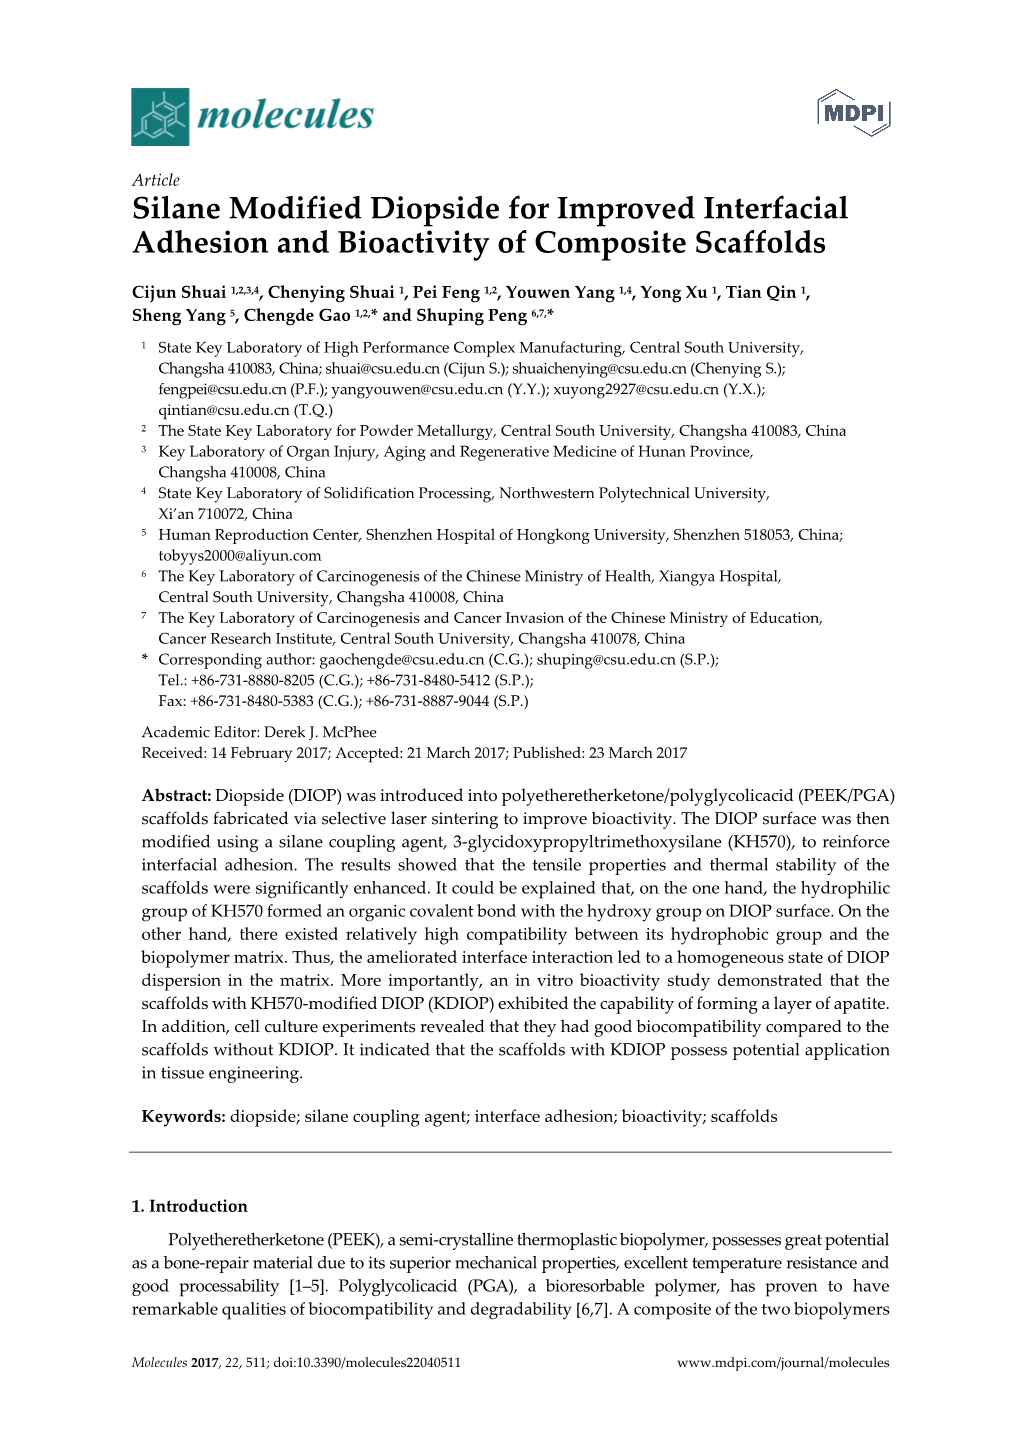 Silane Modified Diopside for Improved Interfacial Adhesion and Bioactivity of Composite Scaffolds